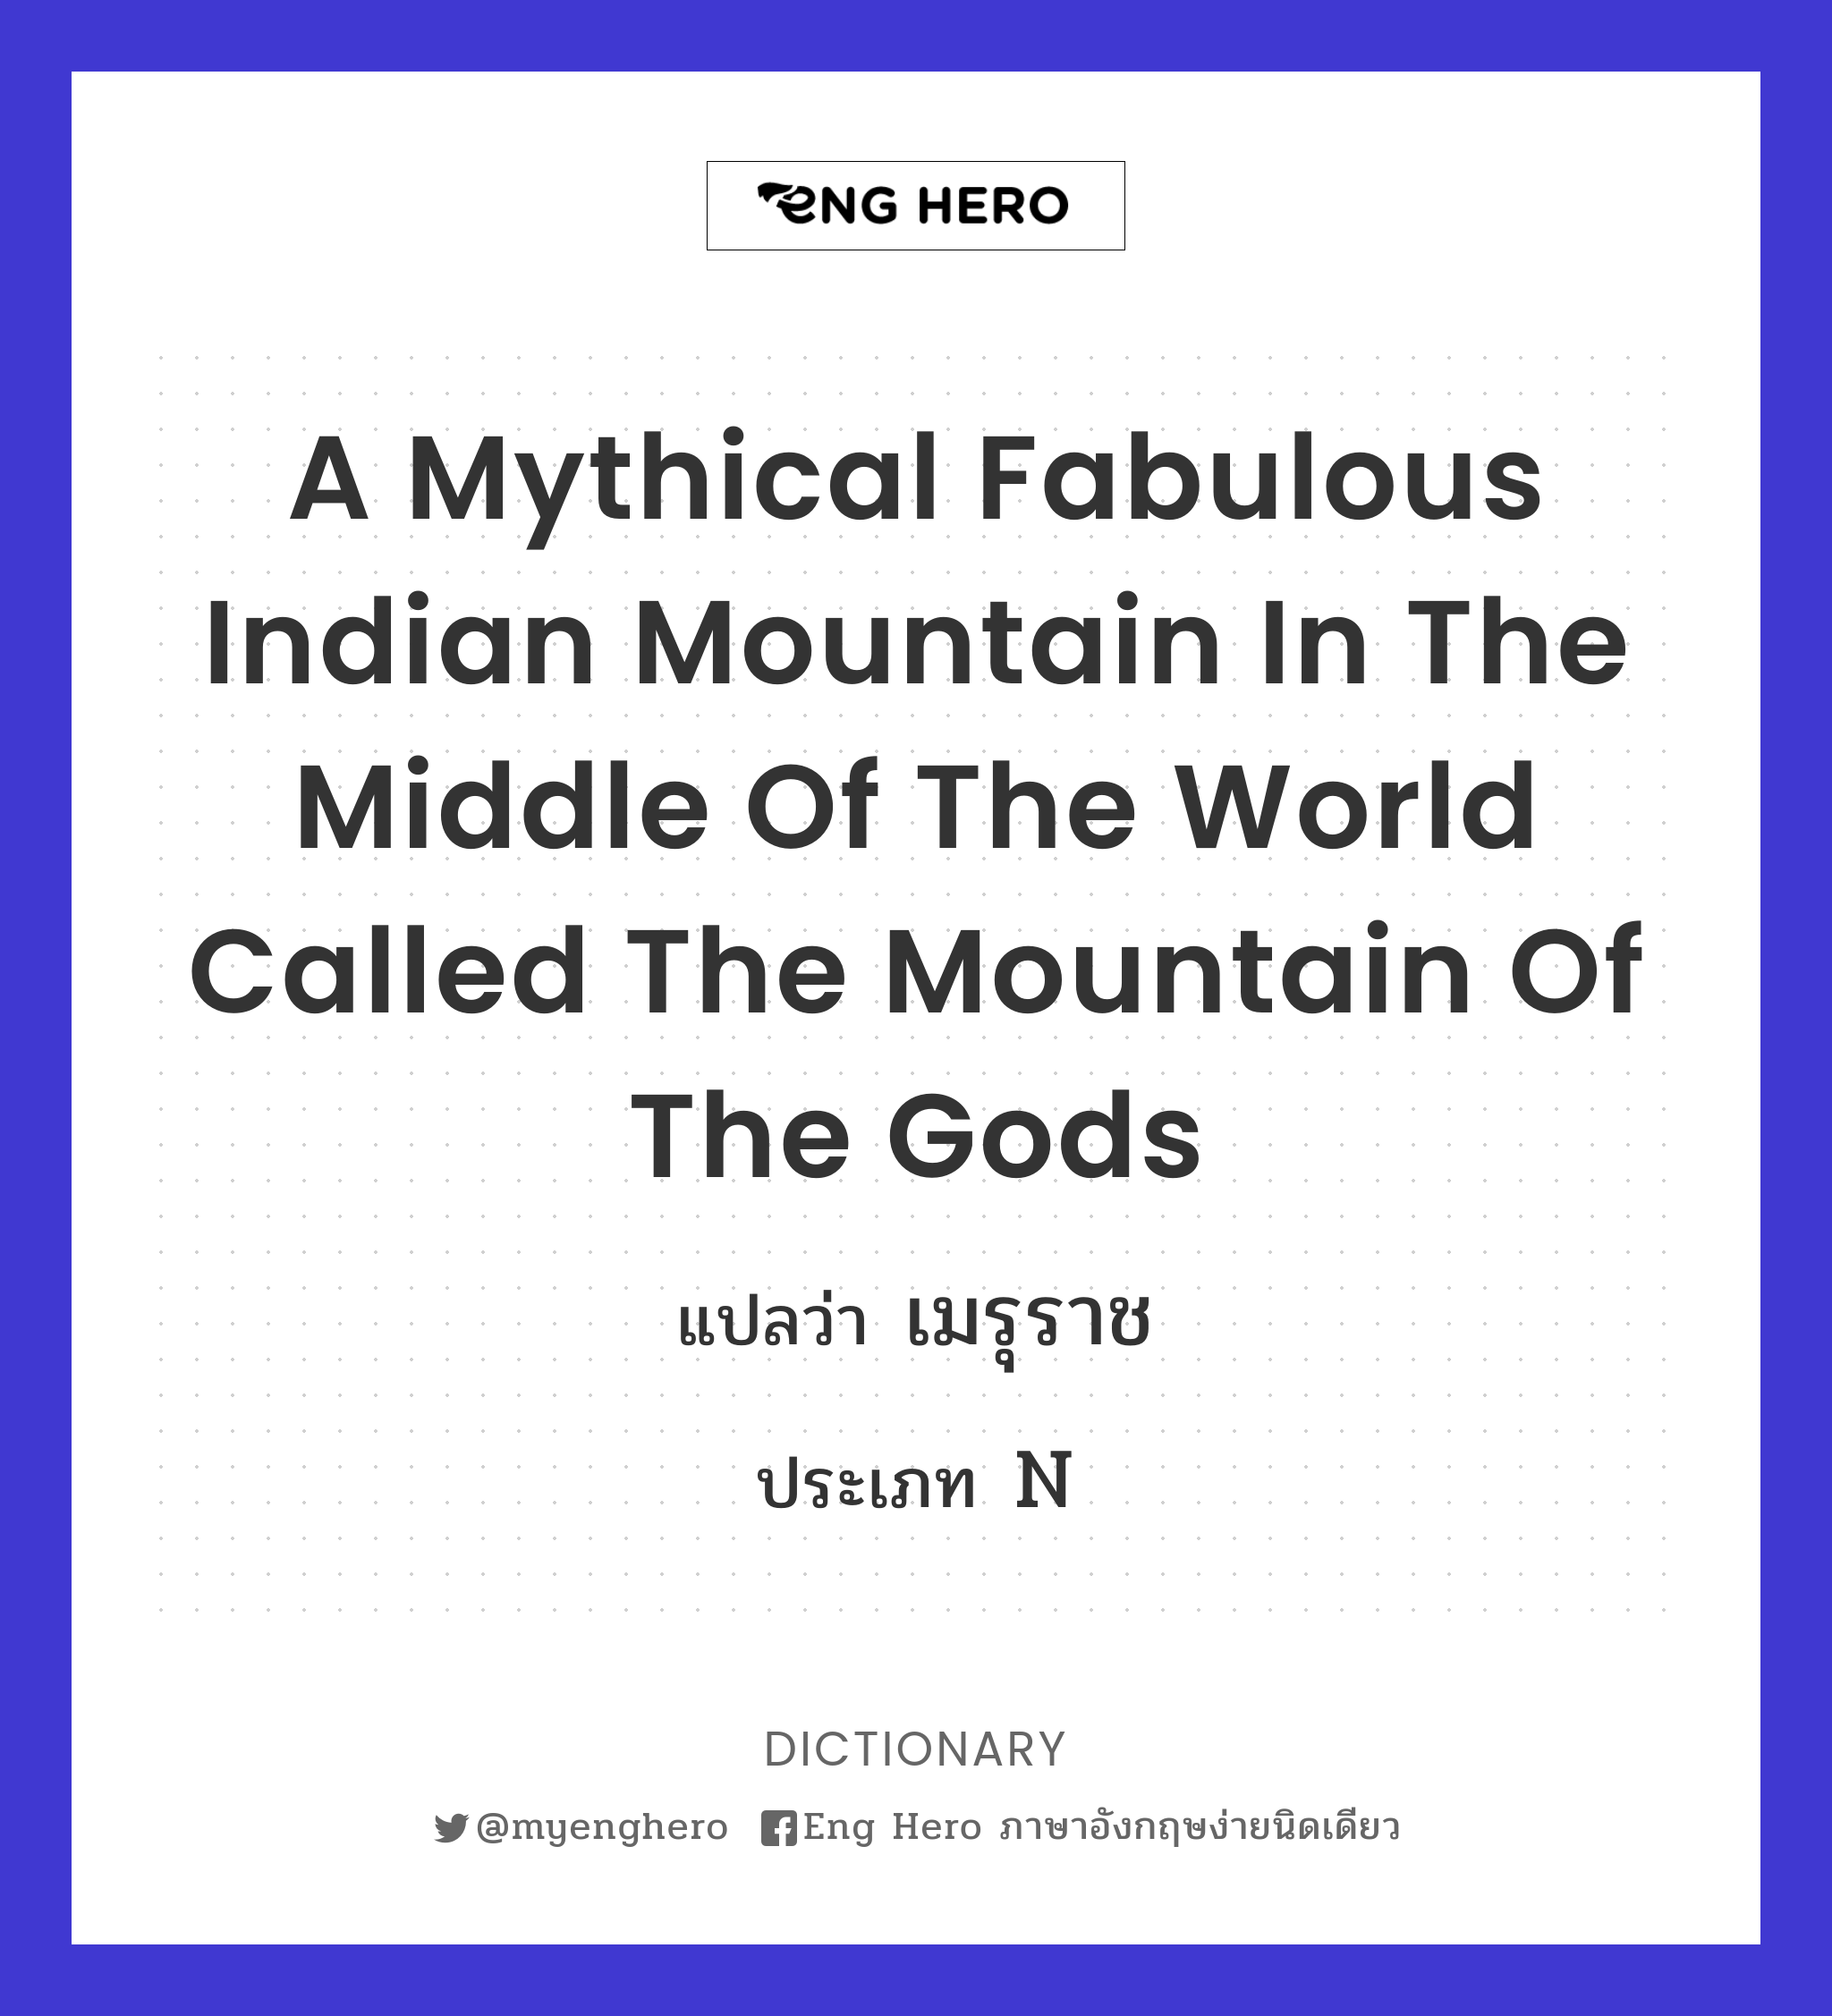 a mythical fabulous Indian mountain in the middle of the world called The Mountain of the Gods